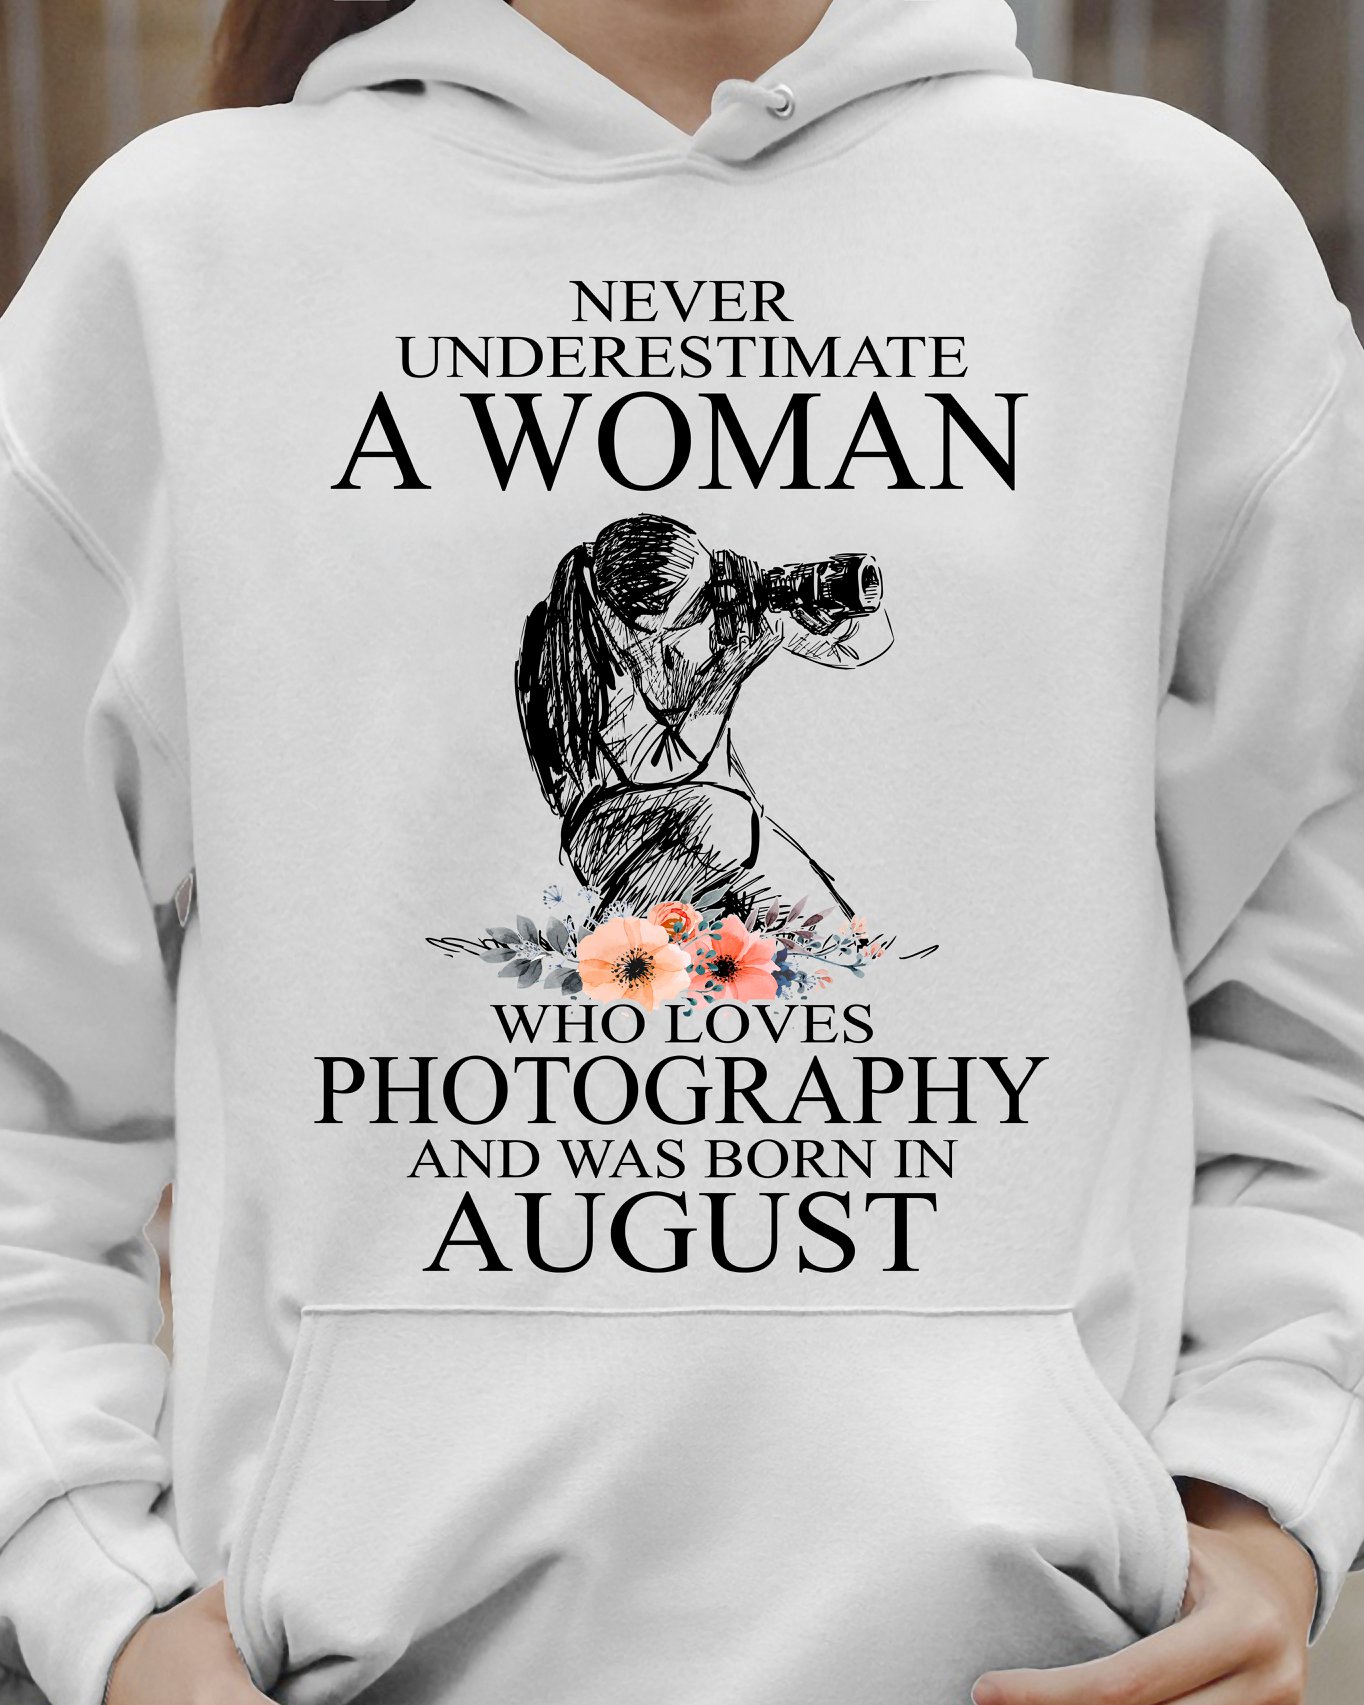 Never underestimate a woman who loves photography and was born in August